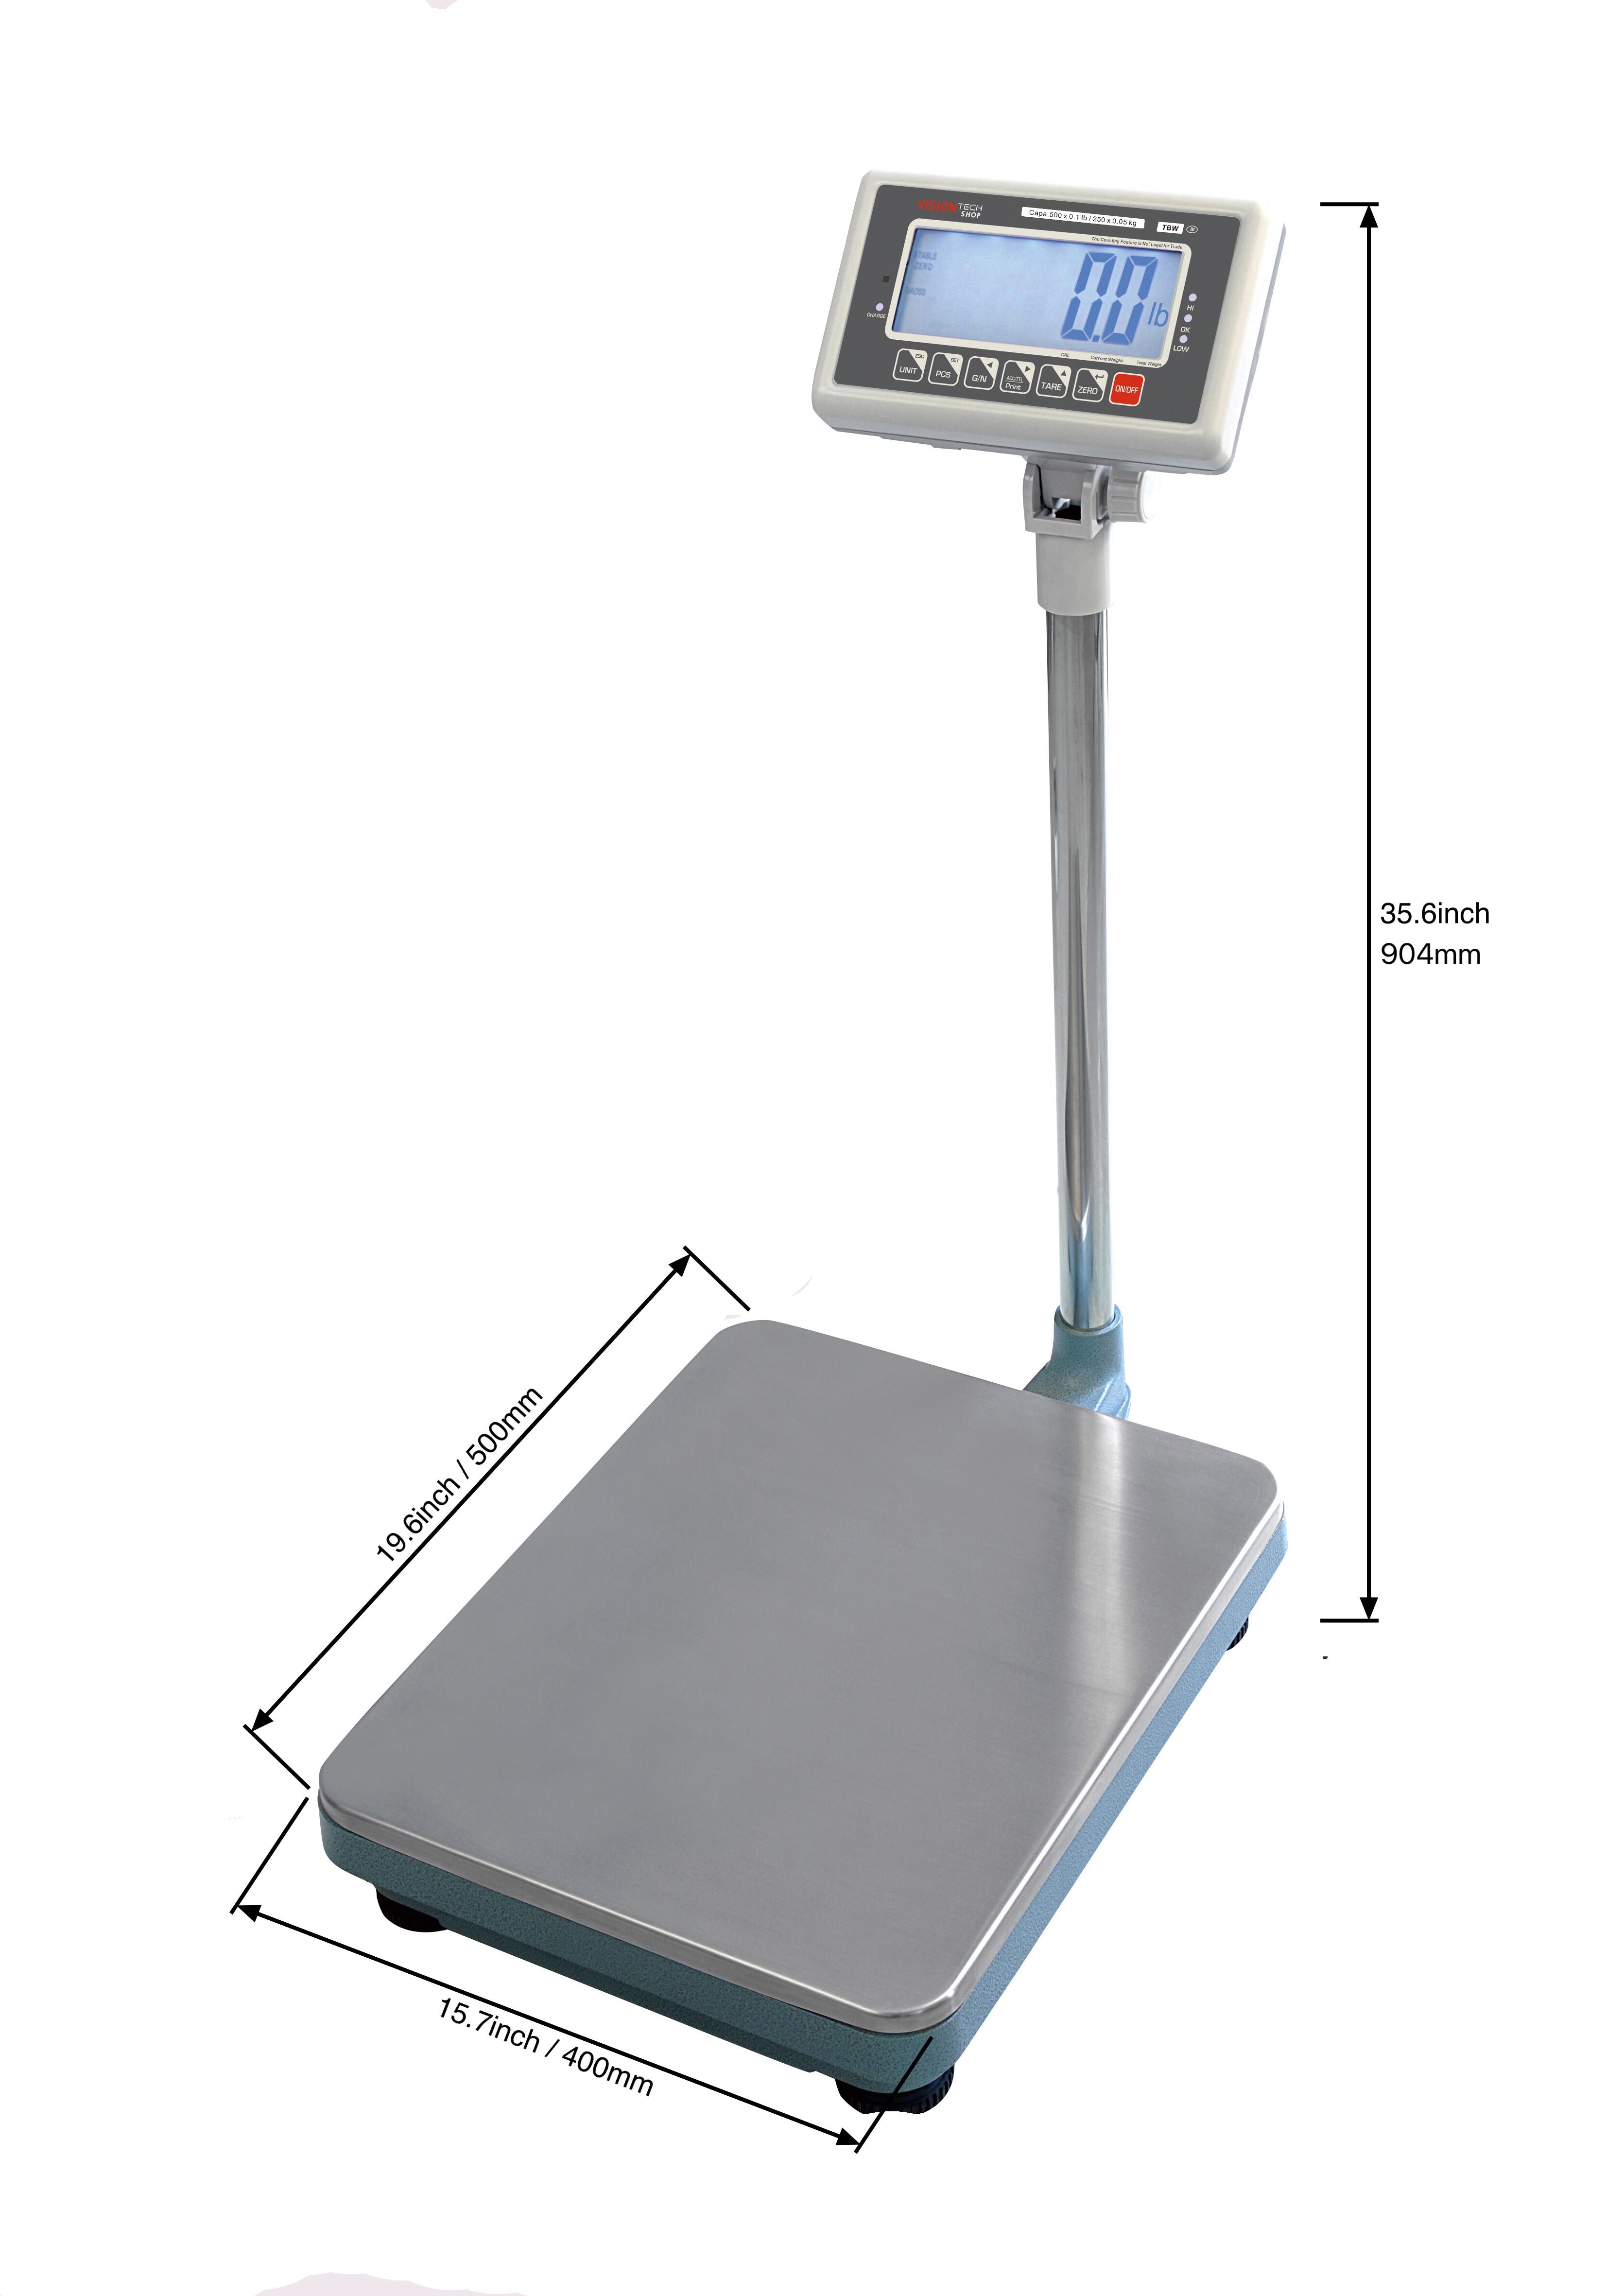 TBW Bench Scale